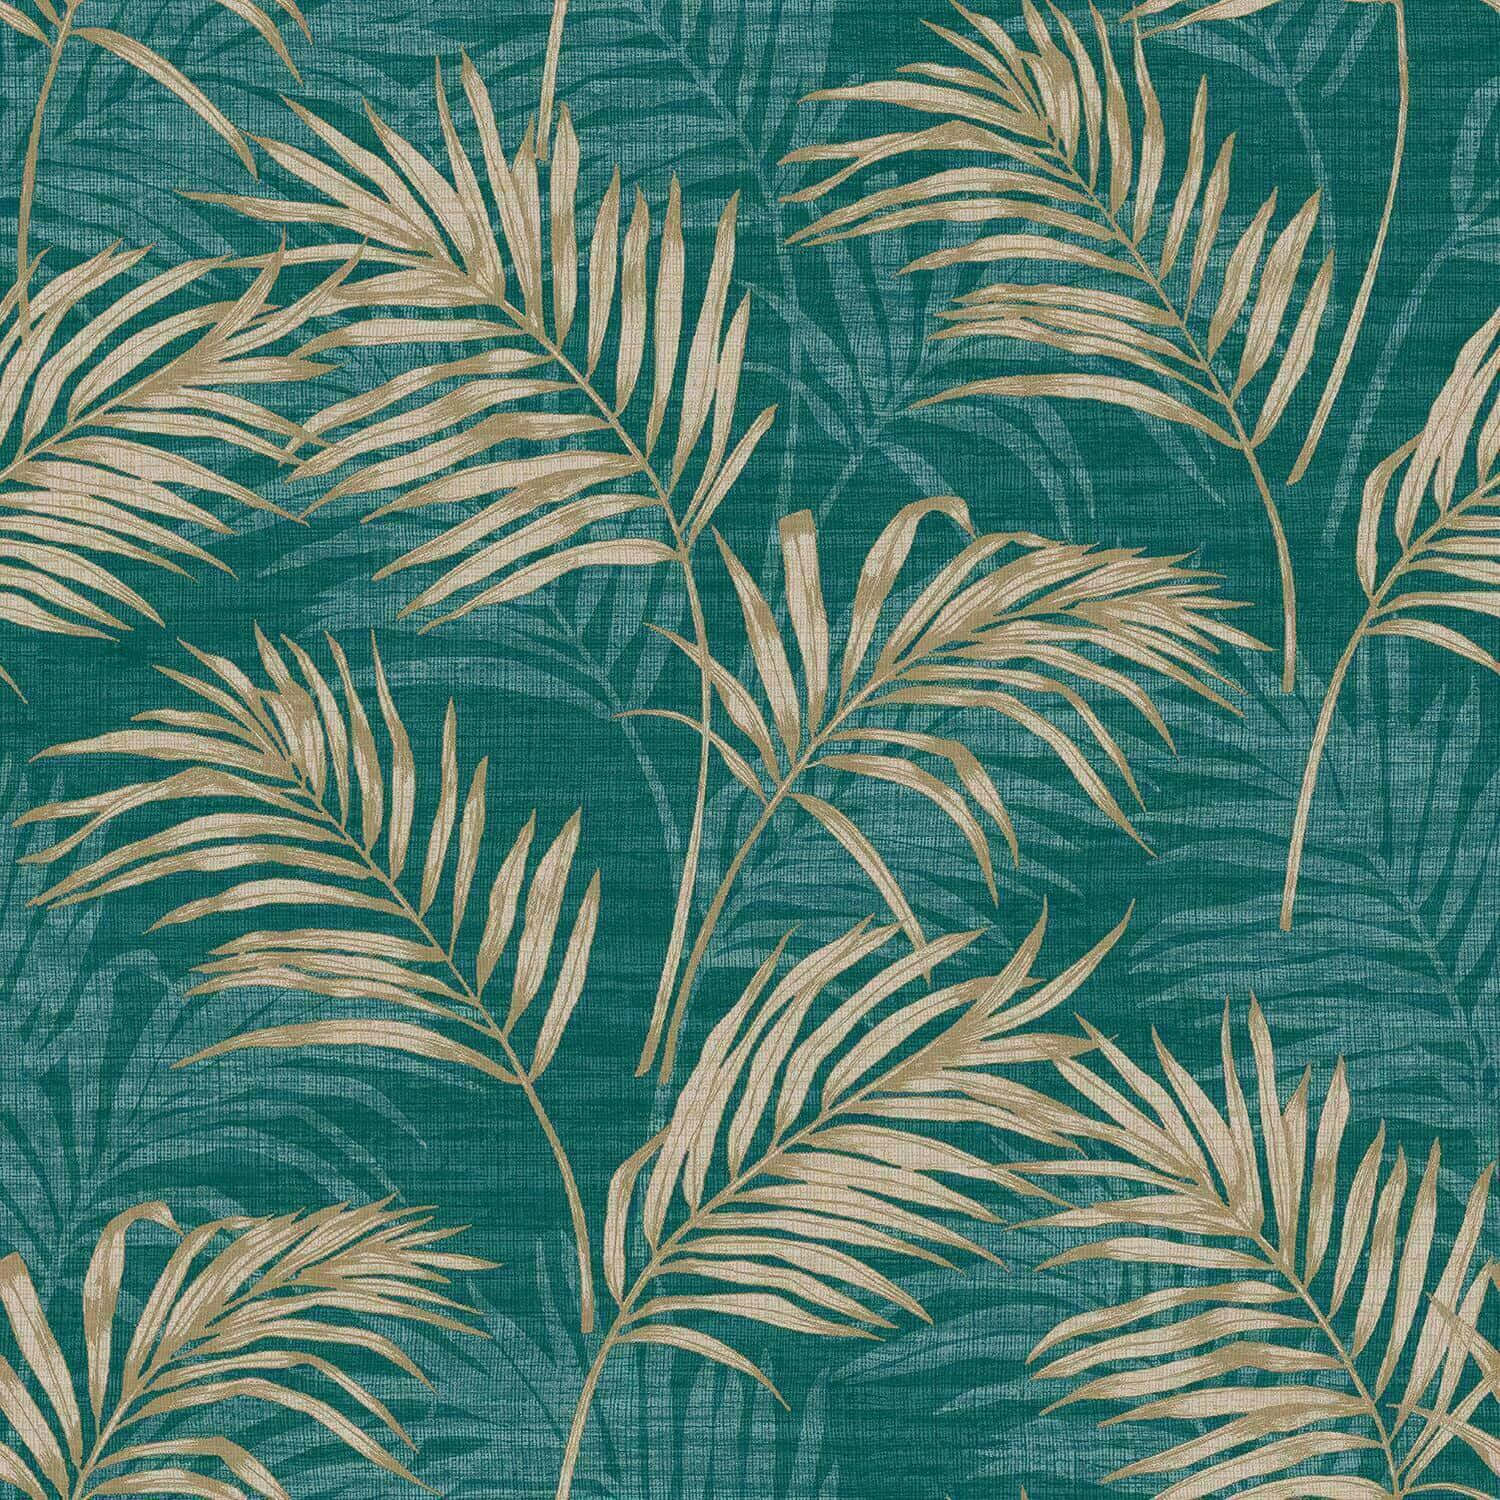 A Teal And Gold Palm Leaf Wallpaper